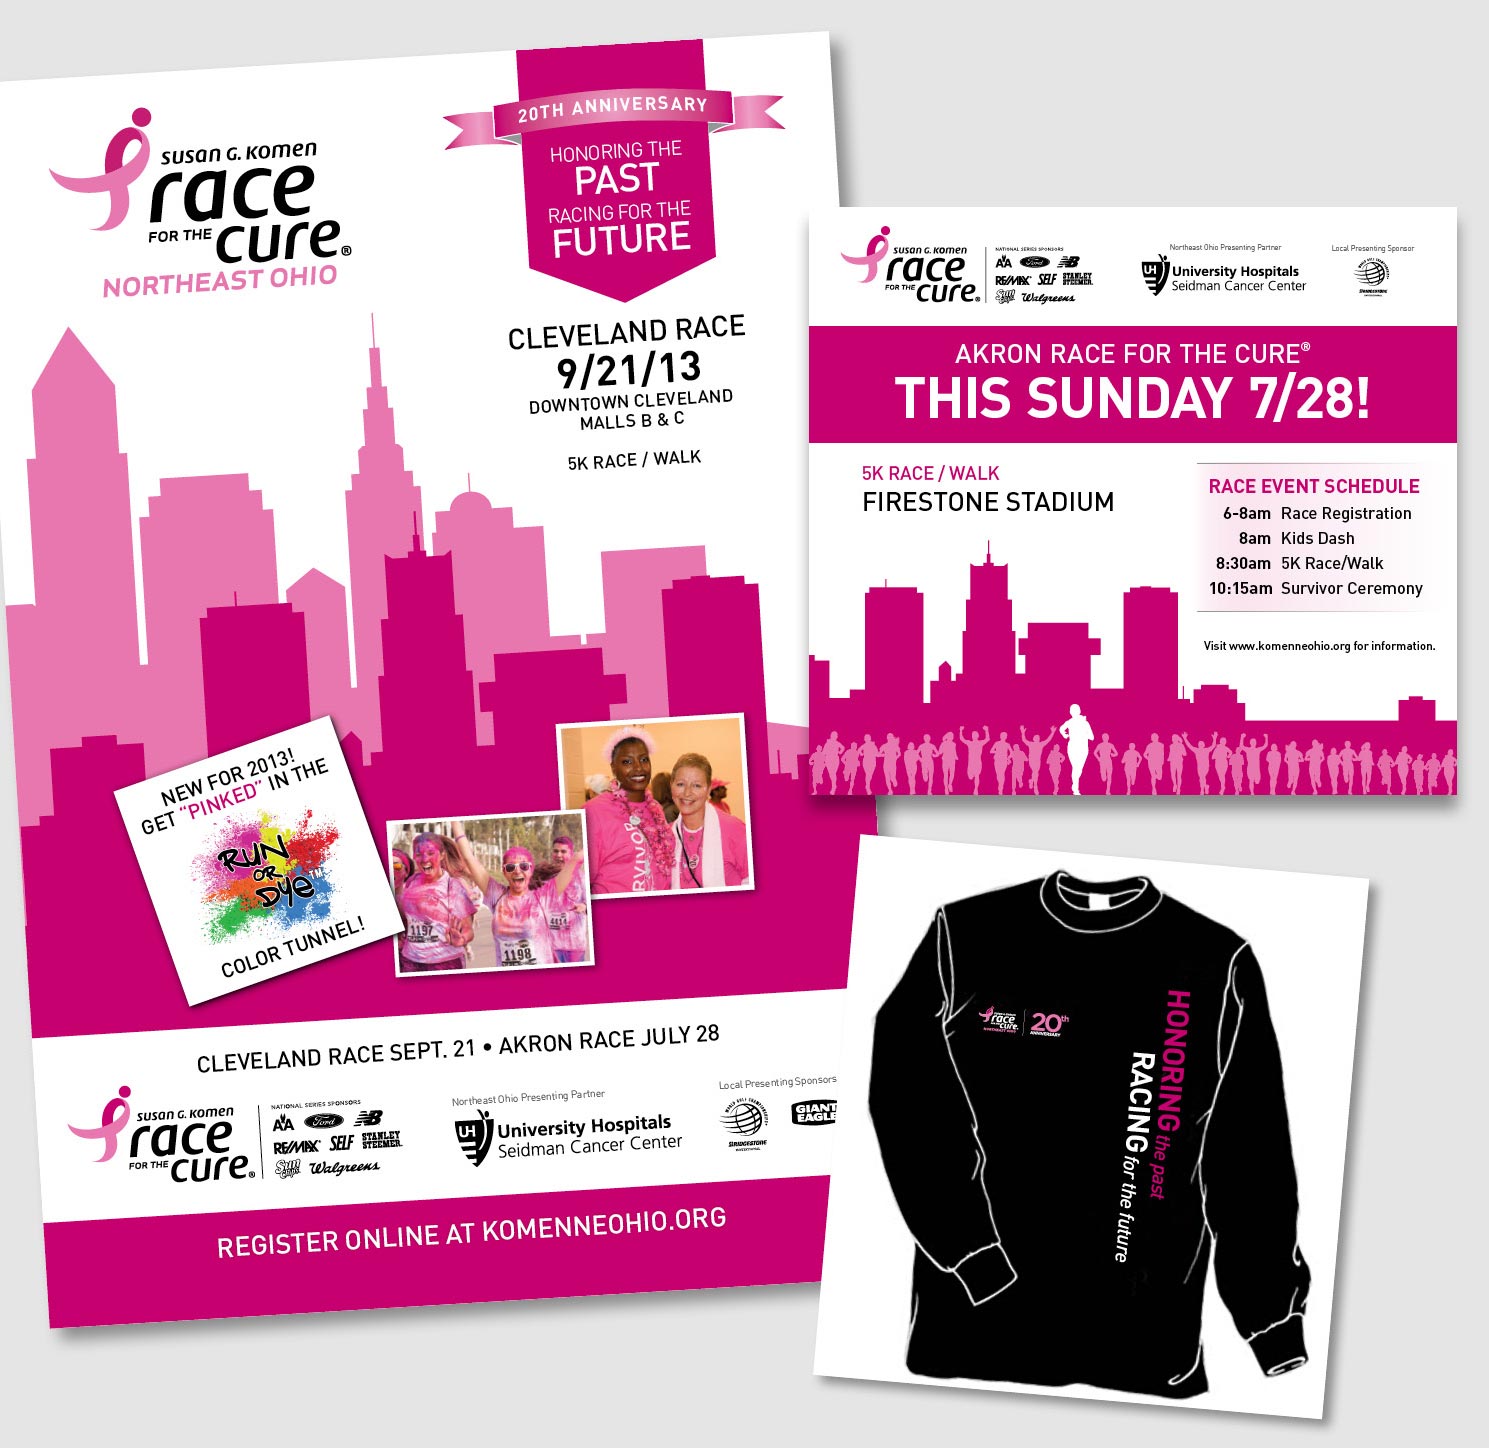  A number of pieces were created to promote the Susan G. Komen Race for the Cure Northeast Ohio Chapter events—posters, pins, stands, brochures, ads, t-shirts, etc. The bright and light pink were pulled from the main logo and carried through pieces a